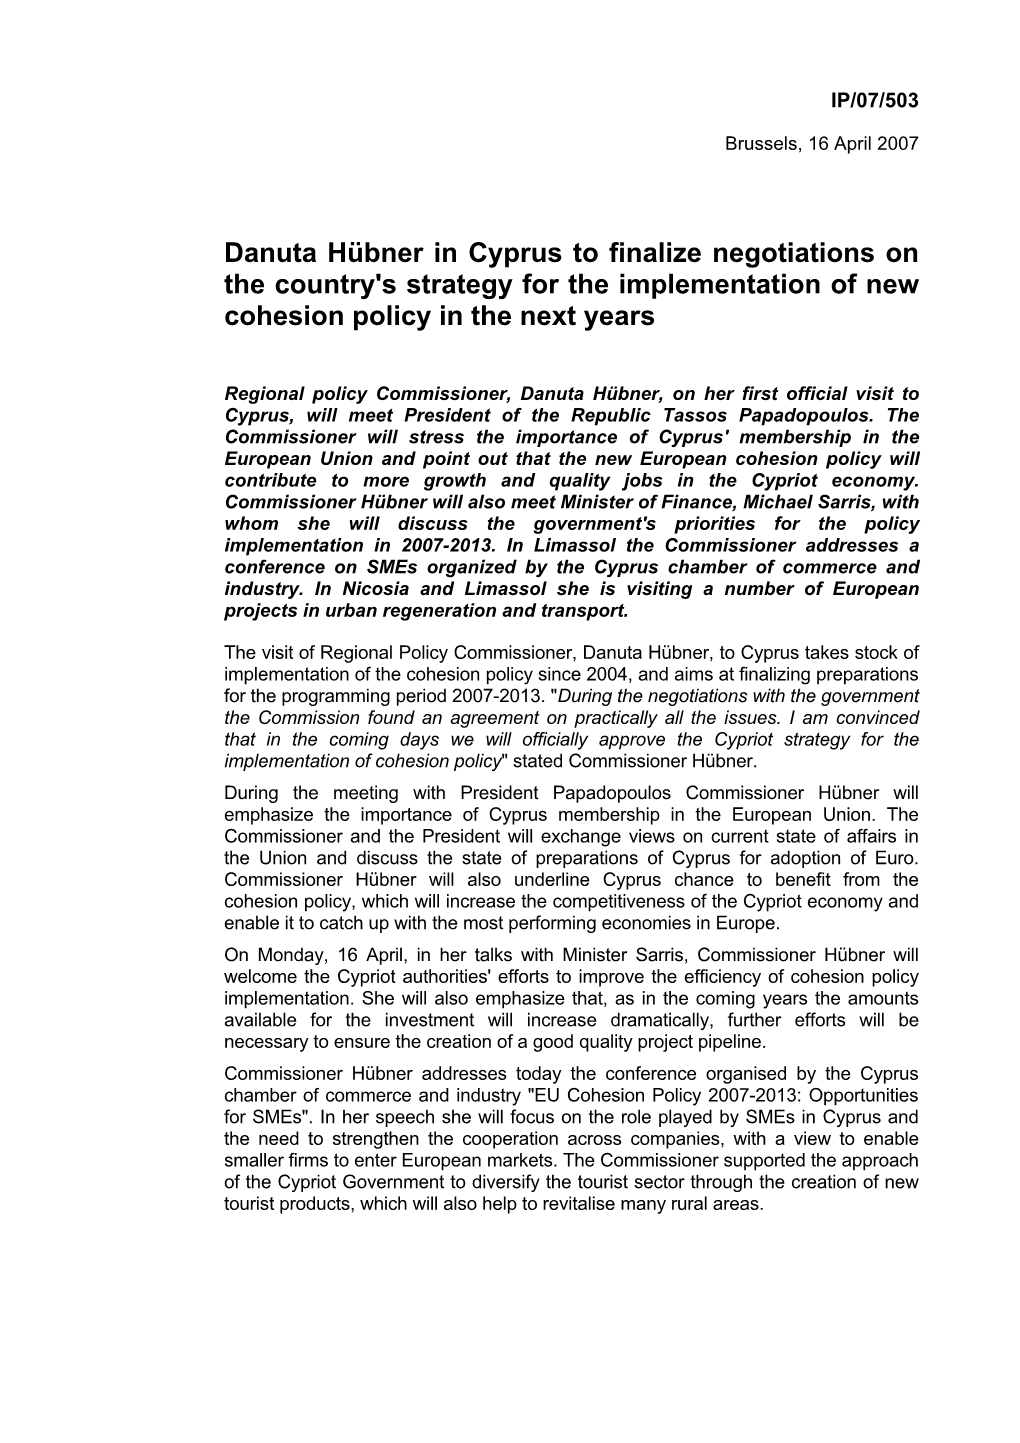 Danuta Hübner in Cyprus to Finalize Negotiations on the Country's Strategy for the Implementation of New Cohesion Policy in the Next Years